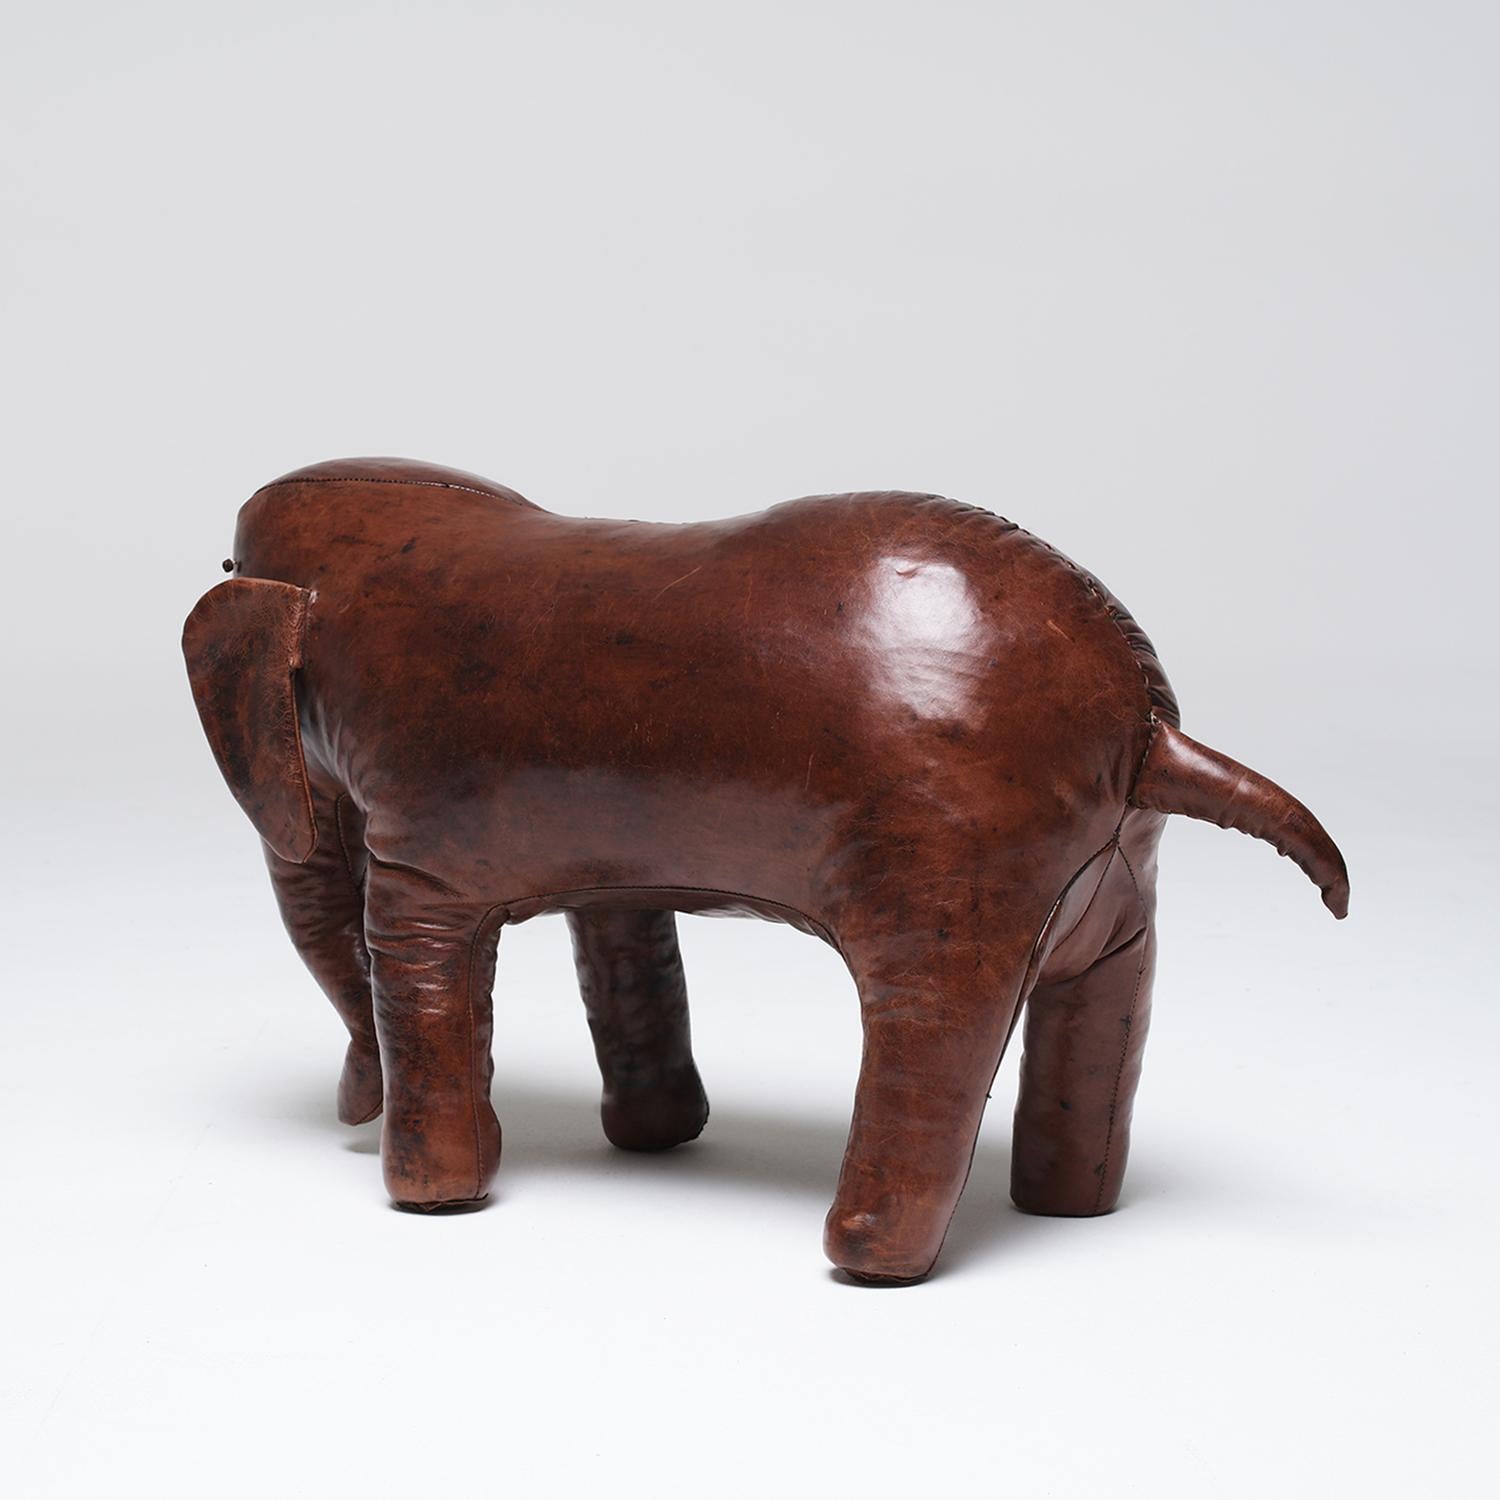 Hand-Crafted 20th Century English Vintage Elephant Footstool in Leather by Dimitri Omersa For Sale